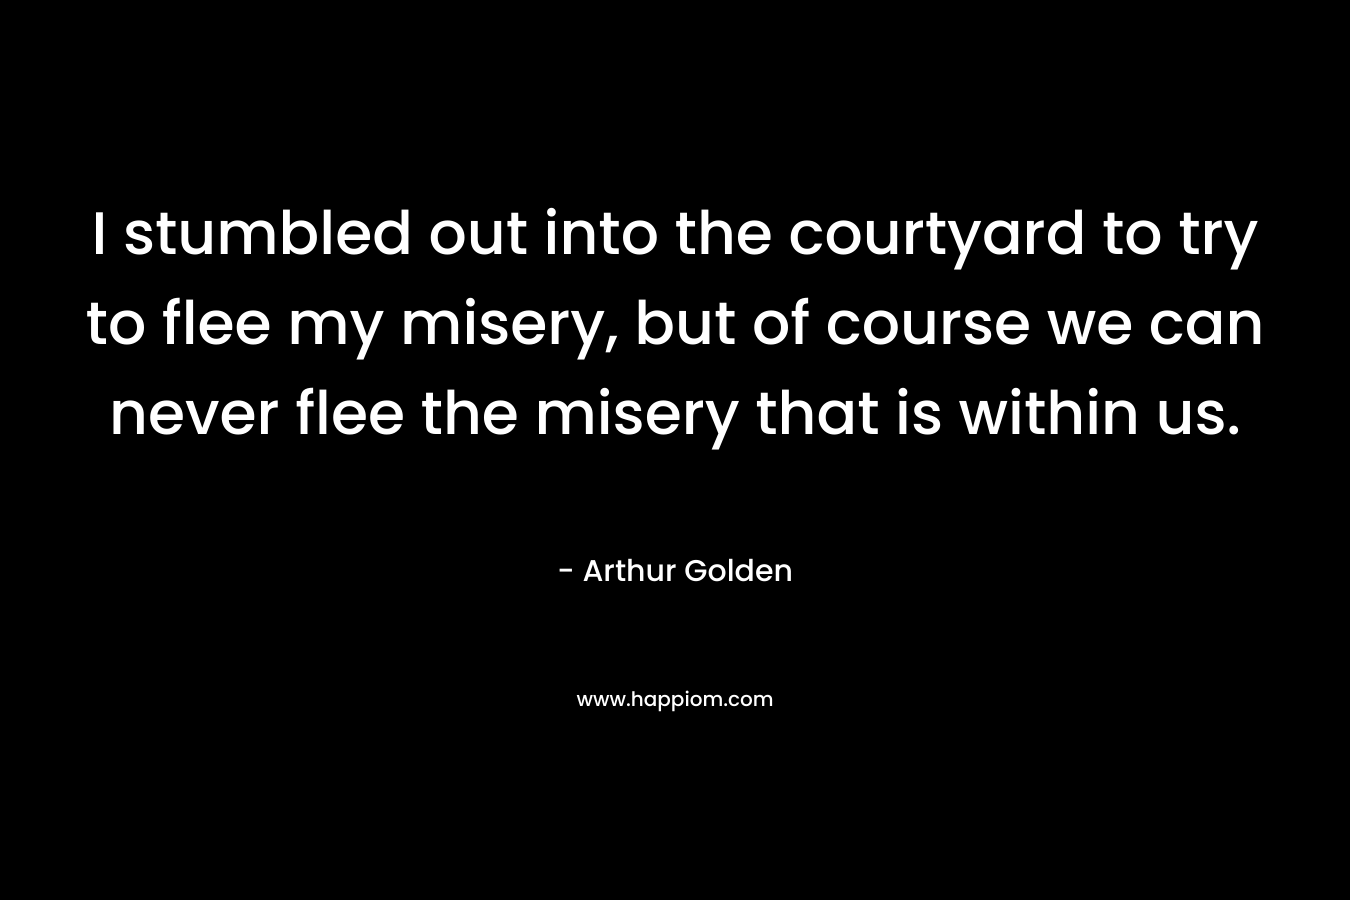 I stumbled out into the courtyard to try to flee my misery, but of course we can never flee the misery that is within us. – Arthur Golden